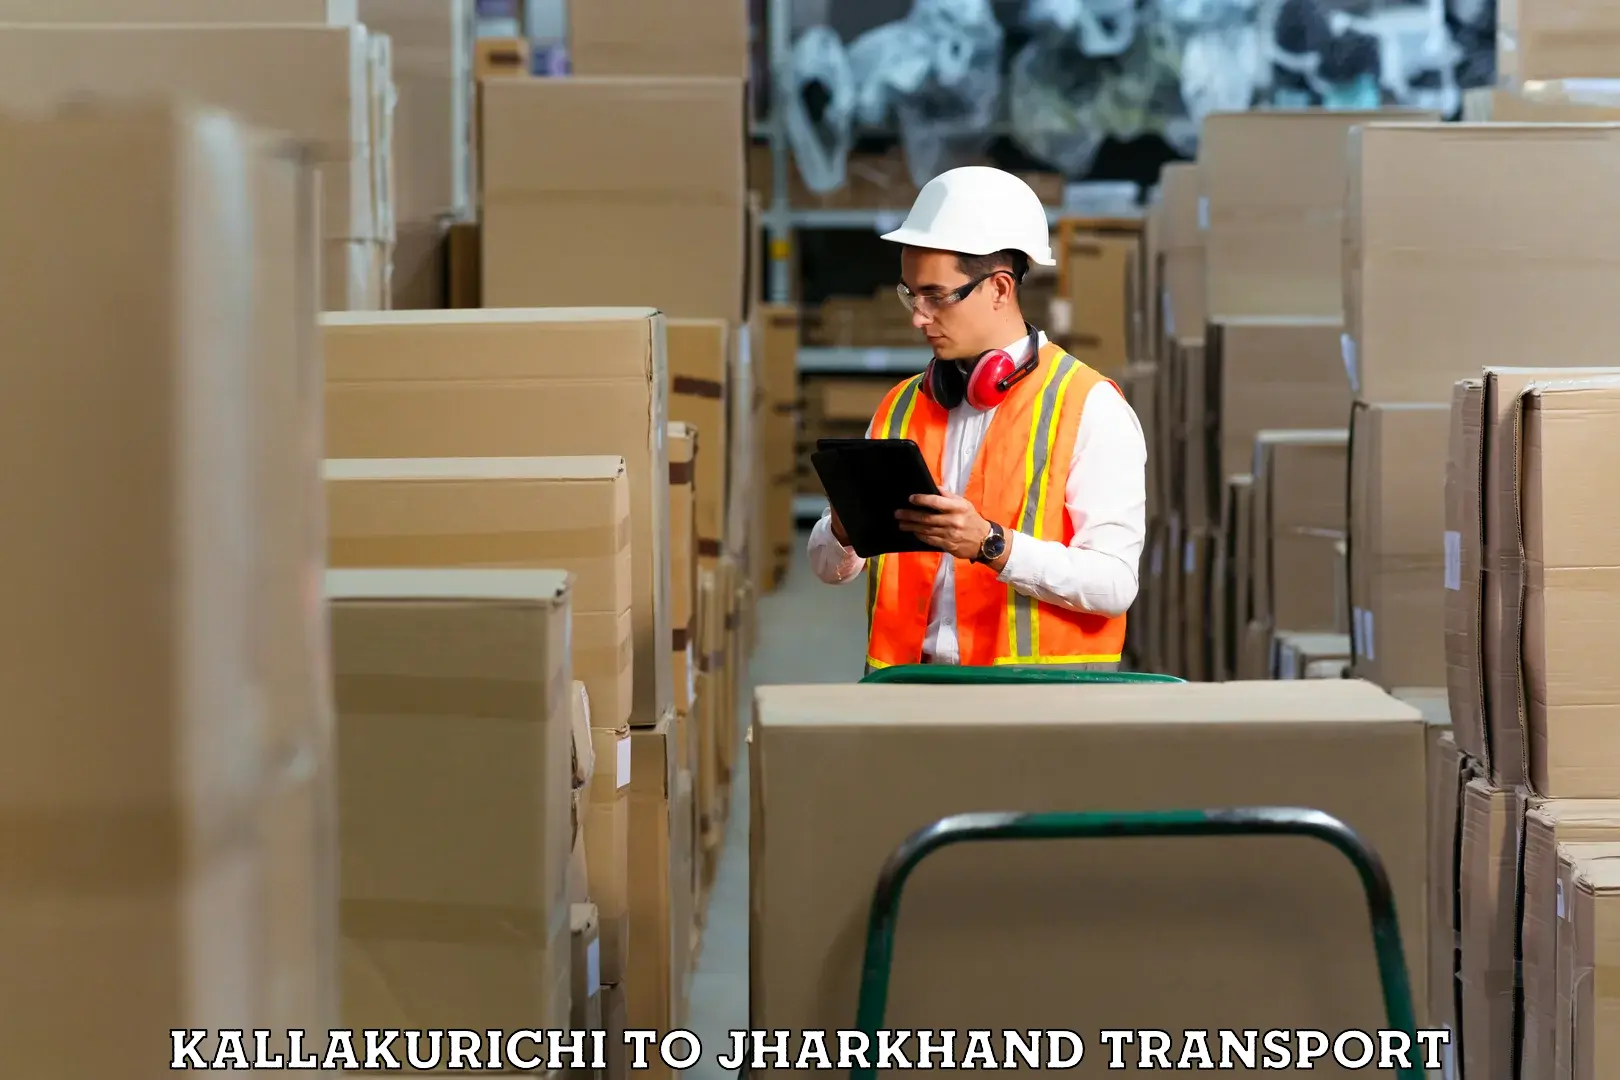 Container transport service Kallakurichi to Jharkhand